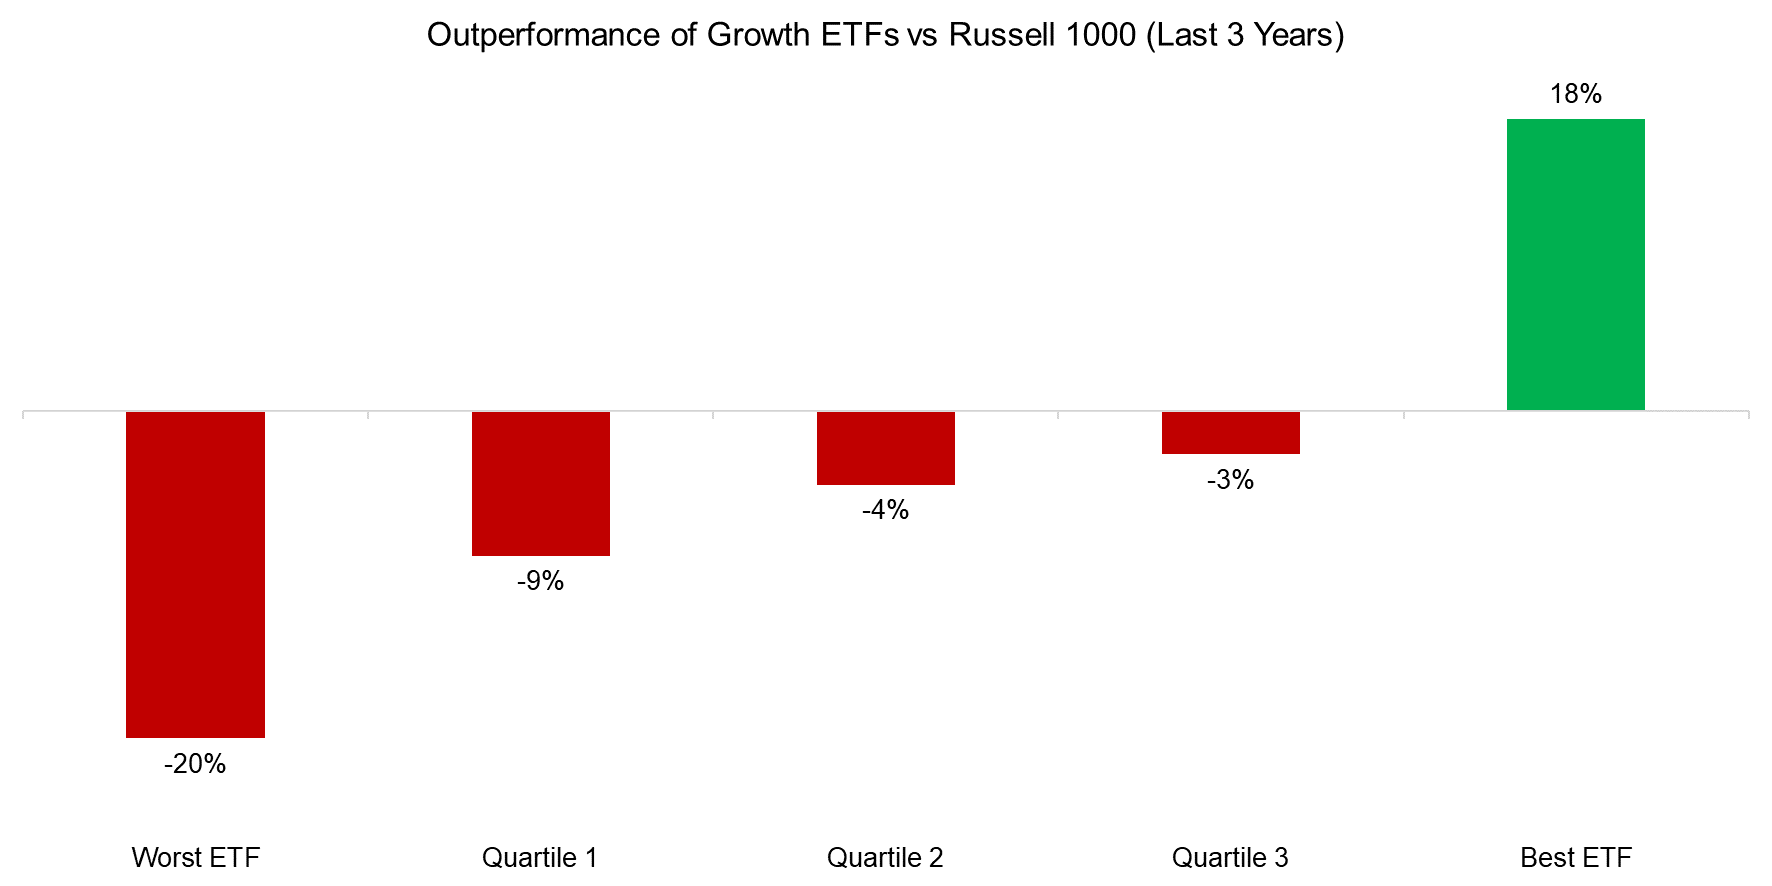 Outperformance of Growth ETFs vs Russell 1000 (Last 3 Years)